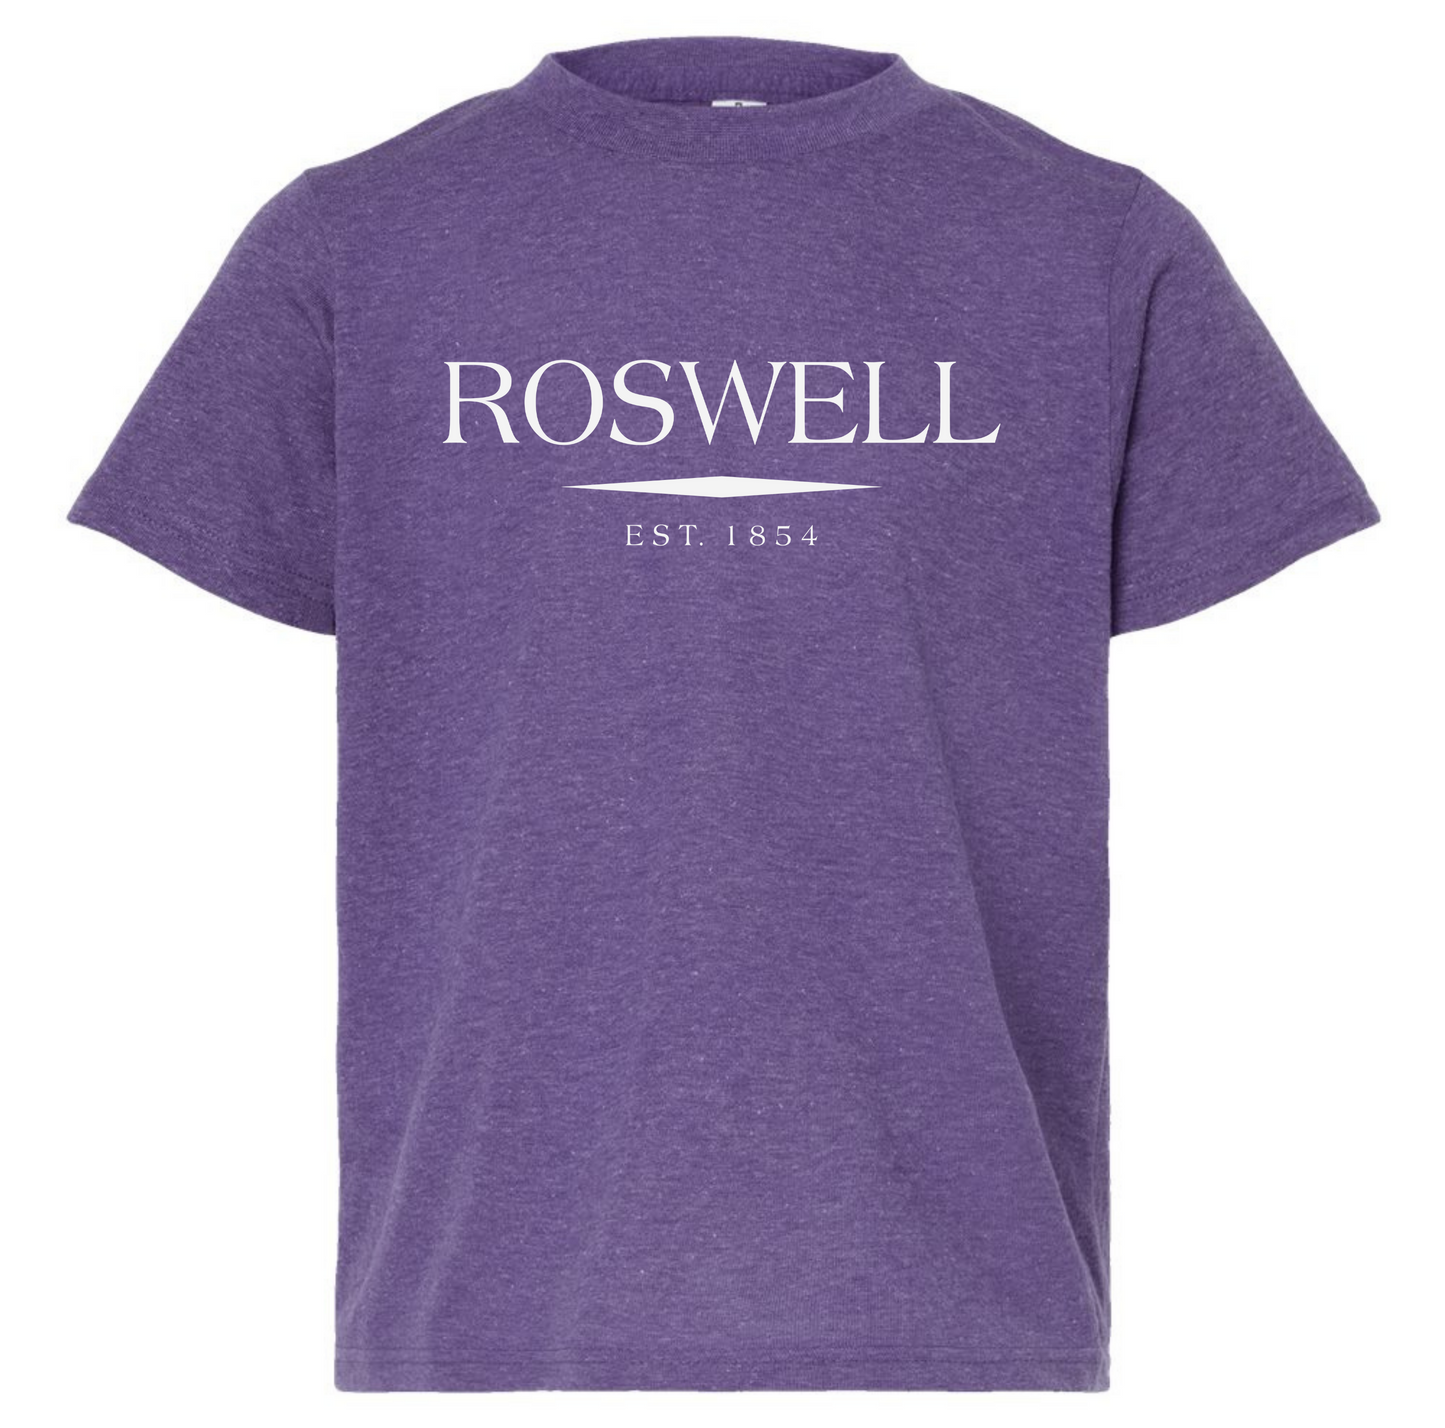 Roswell T-Shirt